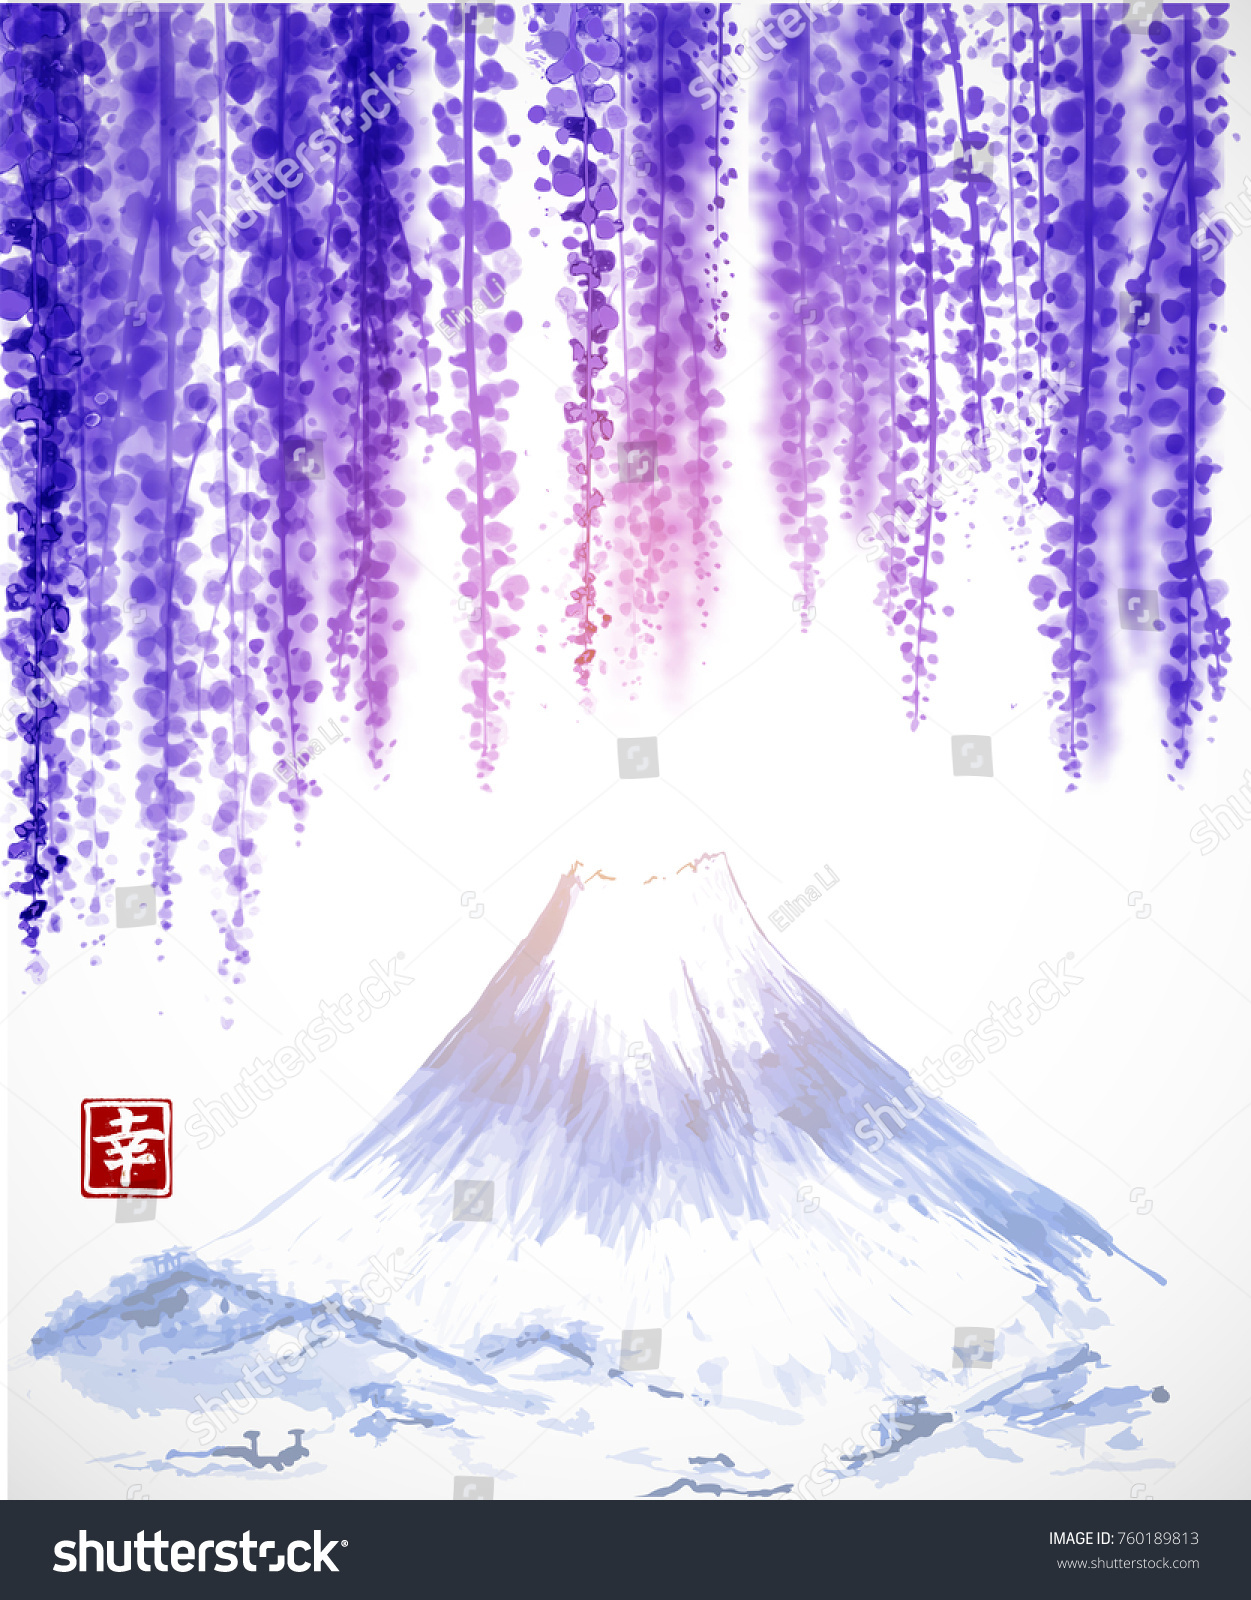 SVG of Wisteria blossom and Fujiyama mountain. Traditional oriental ink painting sumi-e, u-sin, go-hua. Contains hieroglyph - happiness svg